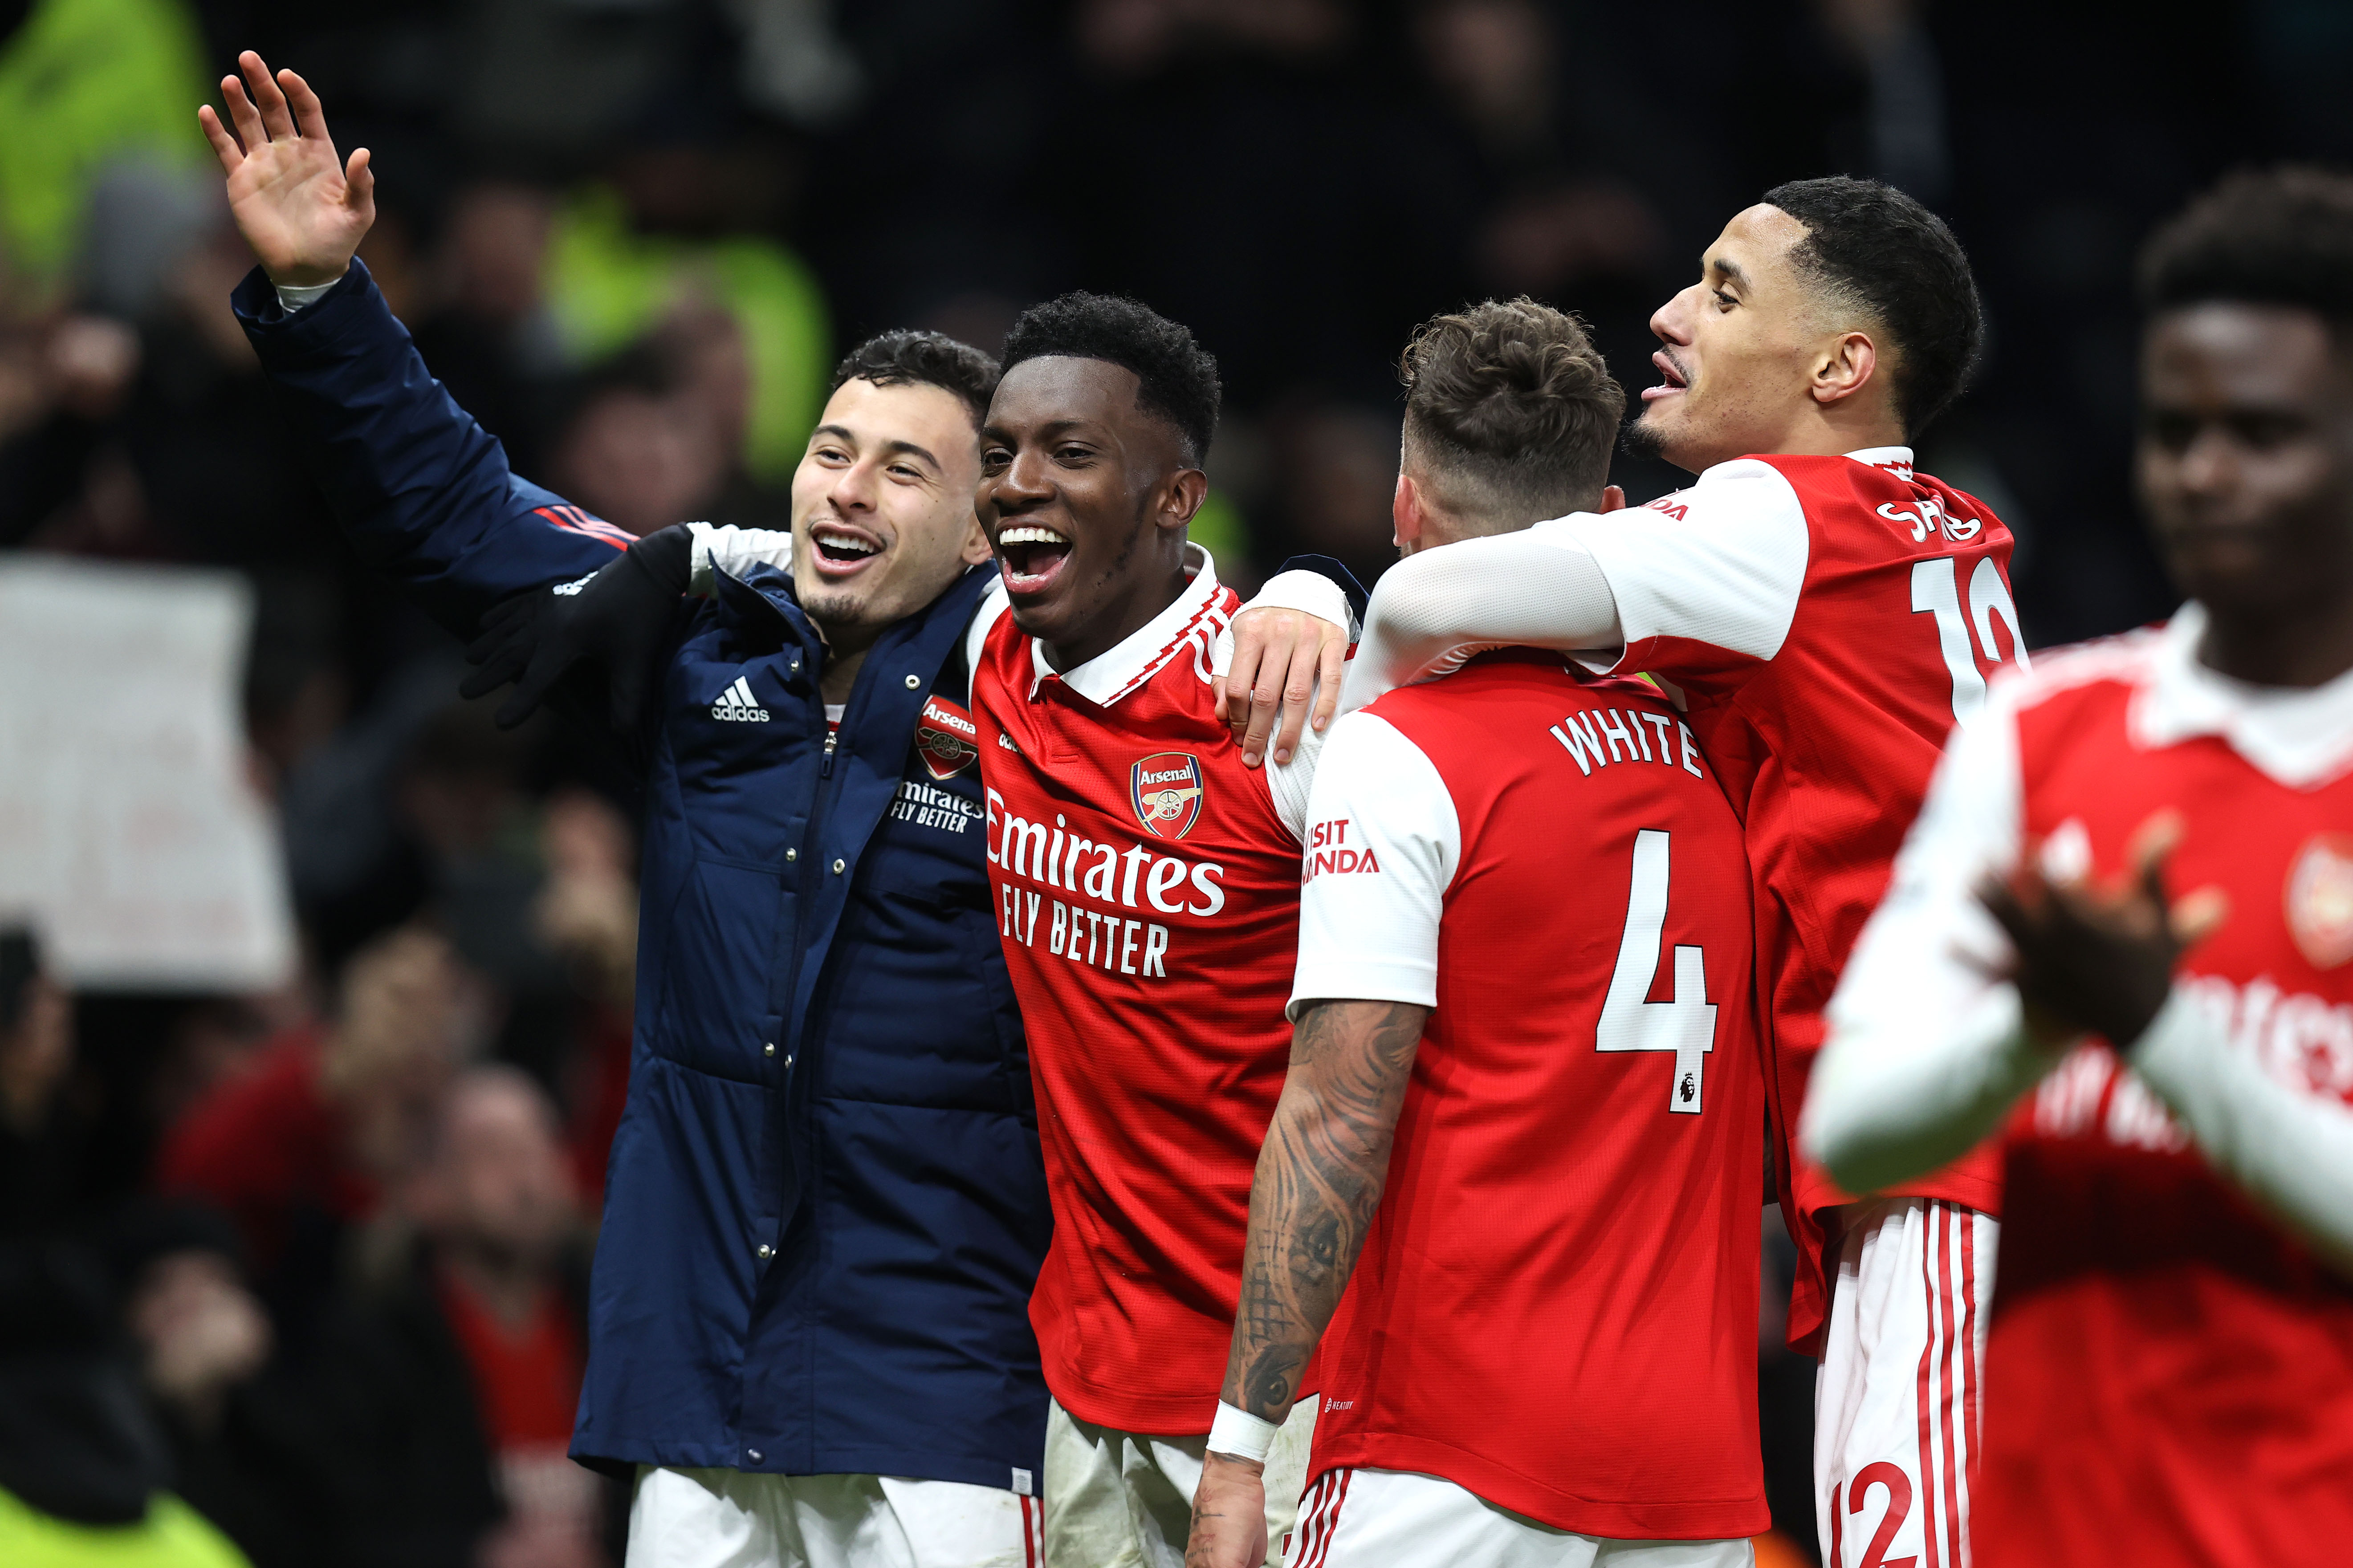 Rearranged match provides chance of early revenge for Arsenal